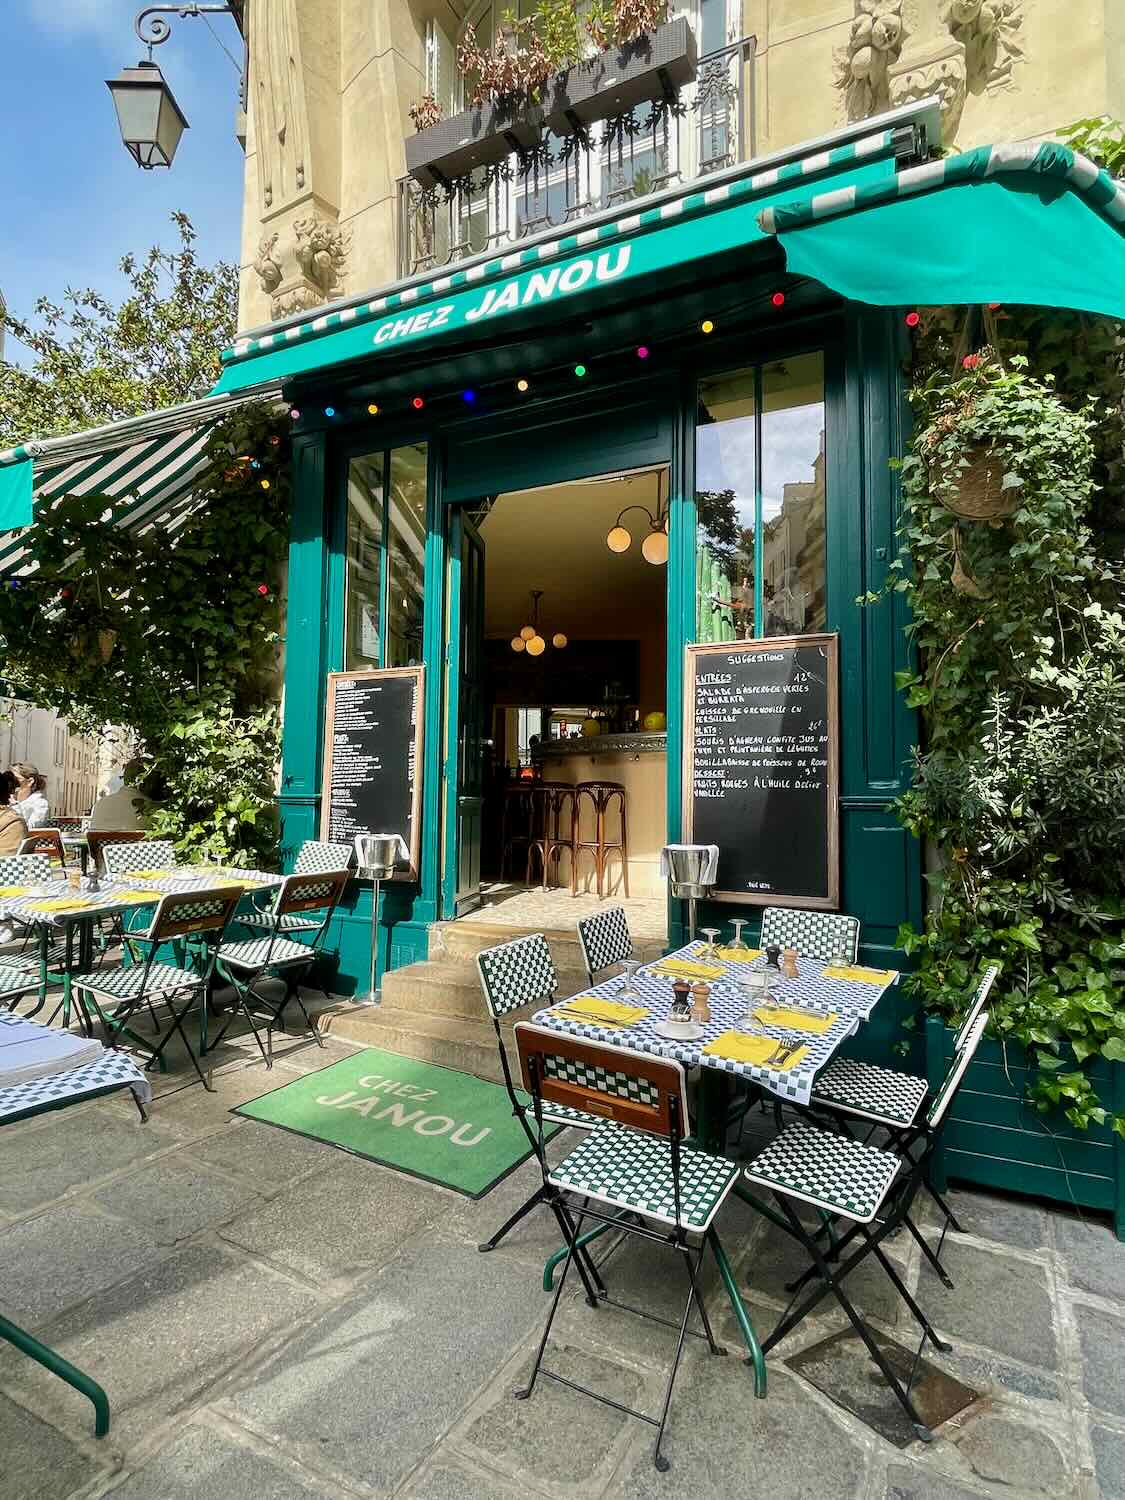 The inviting exterior of Chez Janou, a quaint Parisian bistro with a vibrant green facade and an outdoor seating area covered by a striped awning, set against a backdrop of traditional Paris architecture.